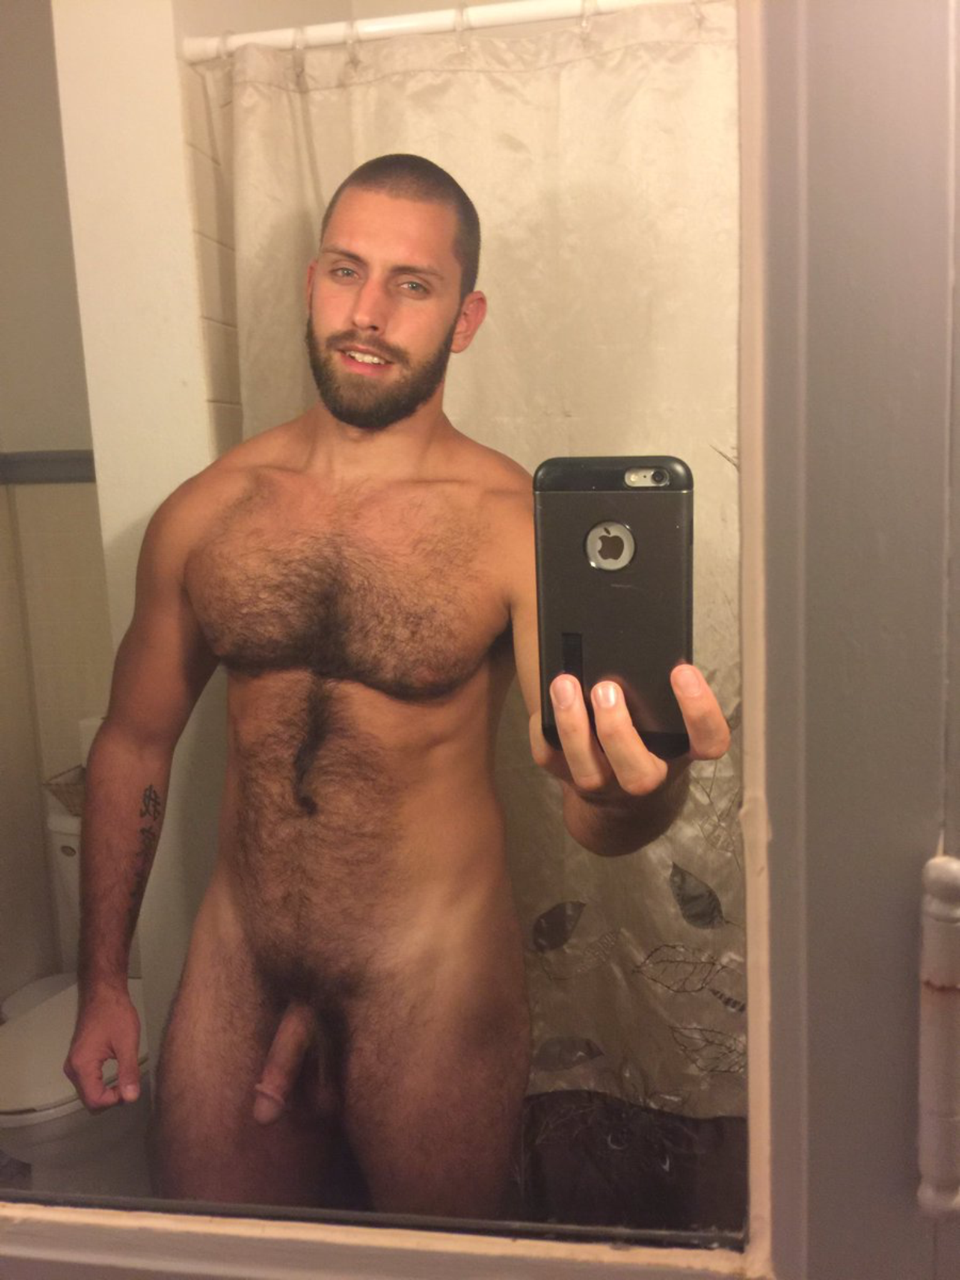 Photo by Smitty with the username @Resol702,  March 26, 2019 at 2:55 PM. The post is about the topic Gay Hairy Men